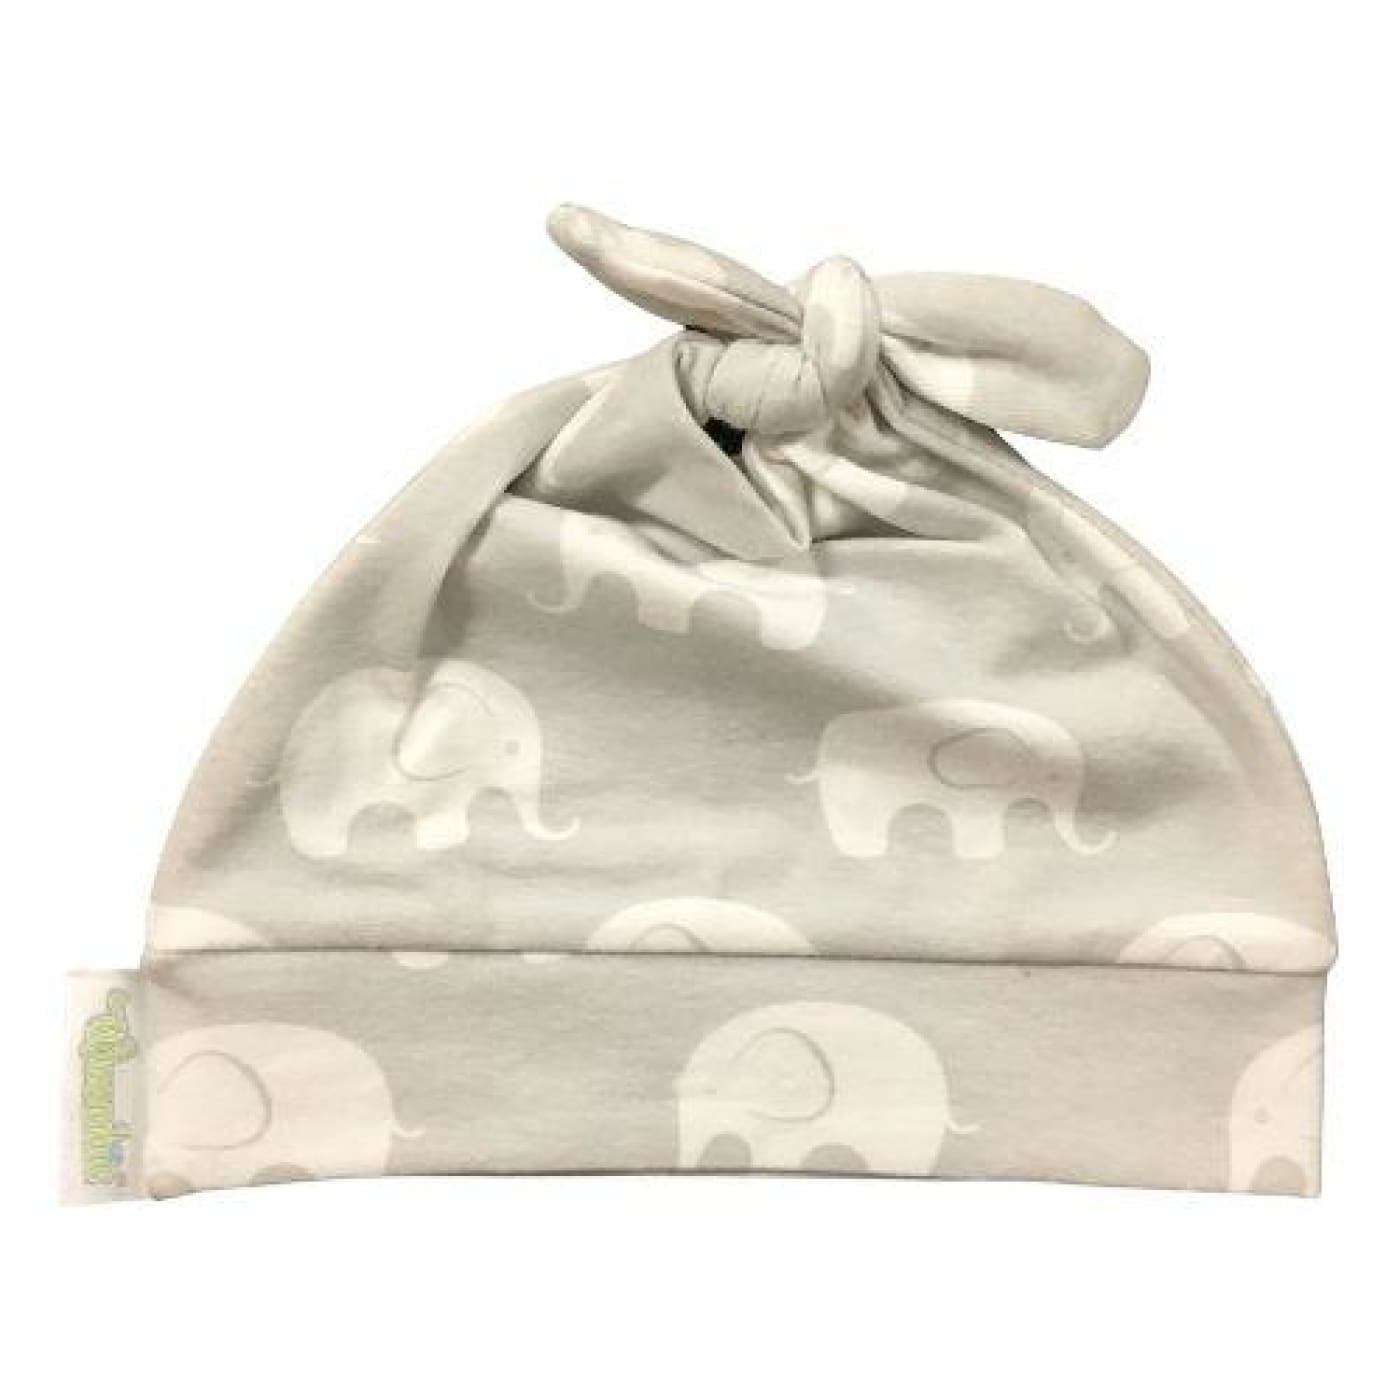 Woombie Cotton Beanie - Dusty Elephant 0-6M - 0-6m / Dusty Elephant - BABY & TODDLER CLOTHING - BEANIES/HATS